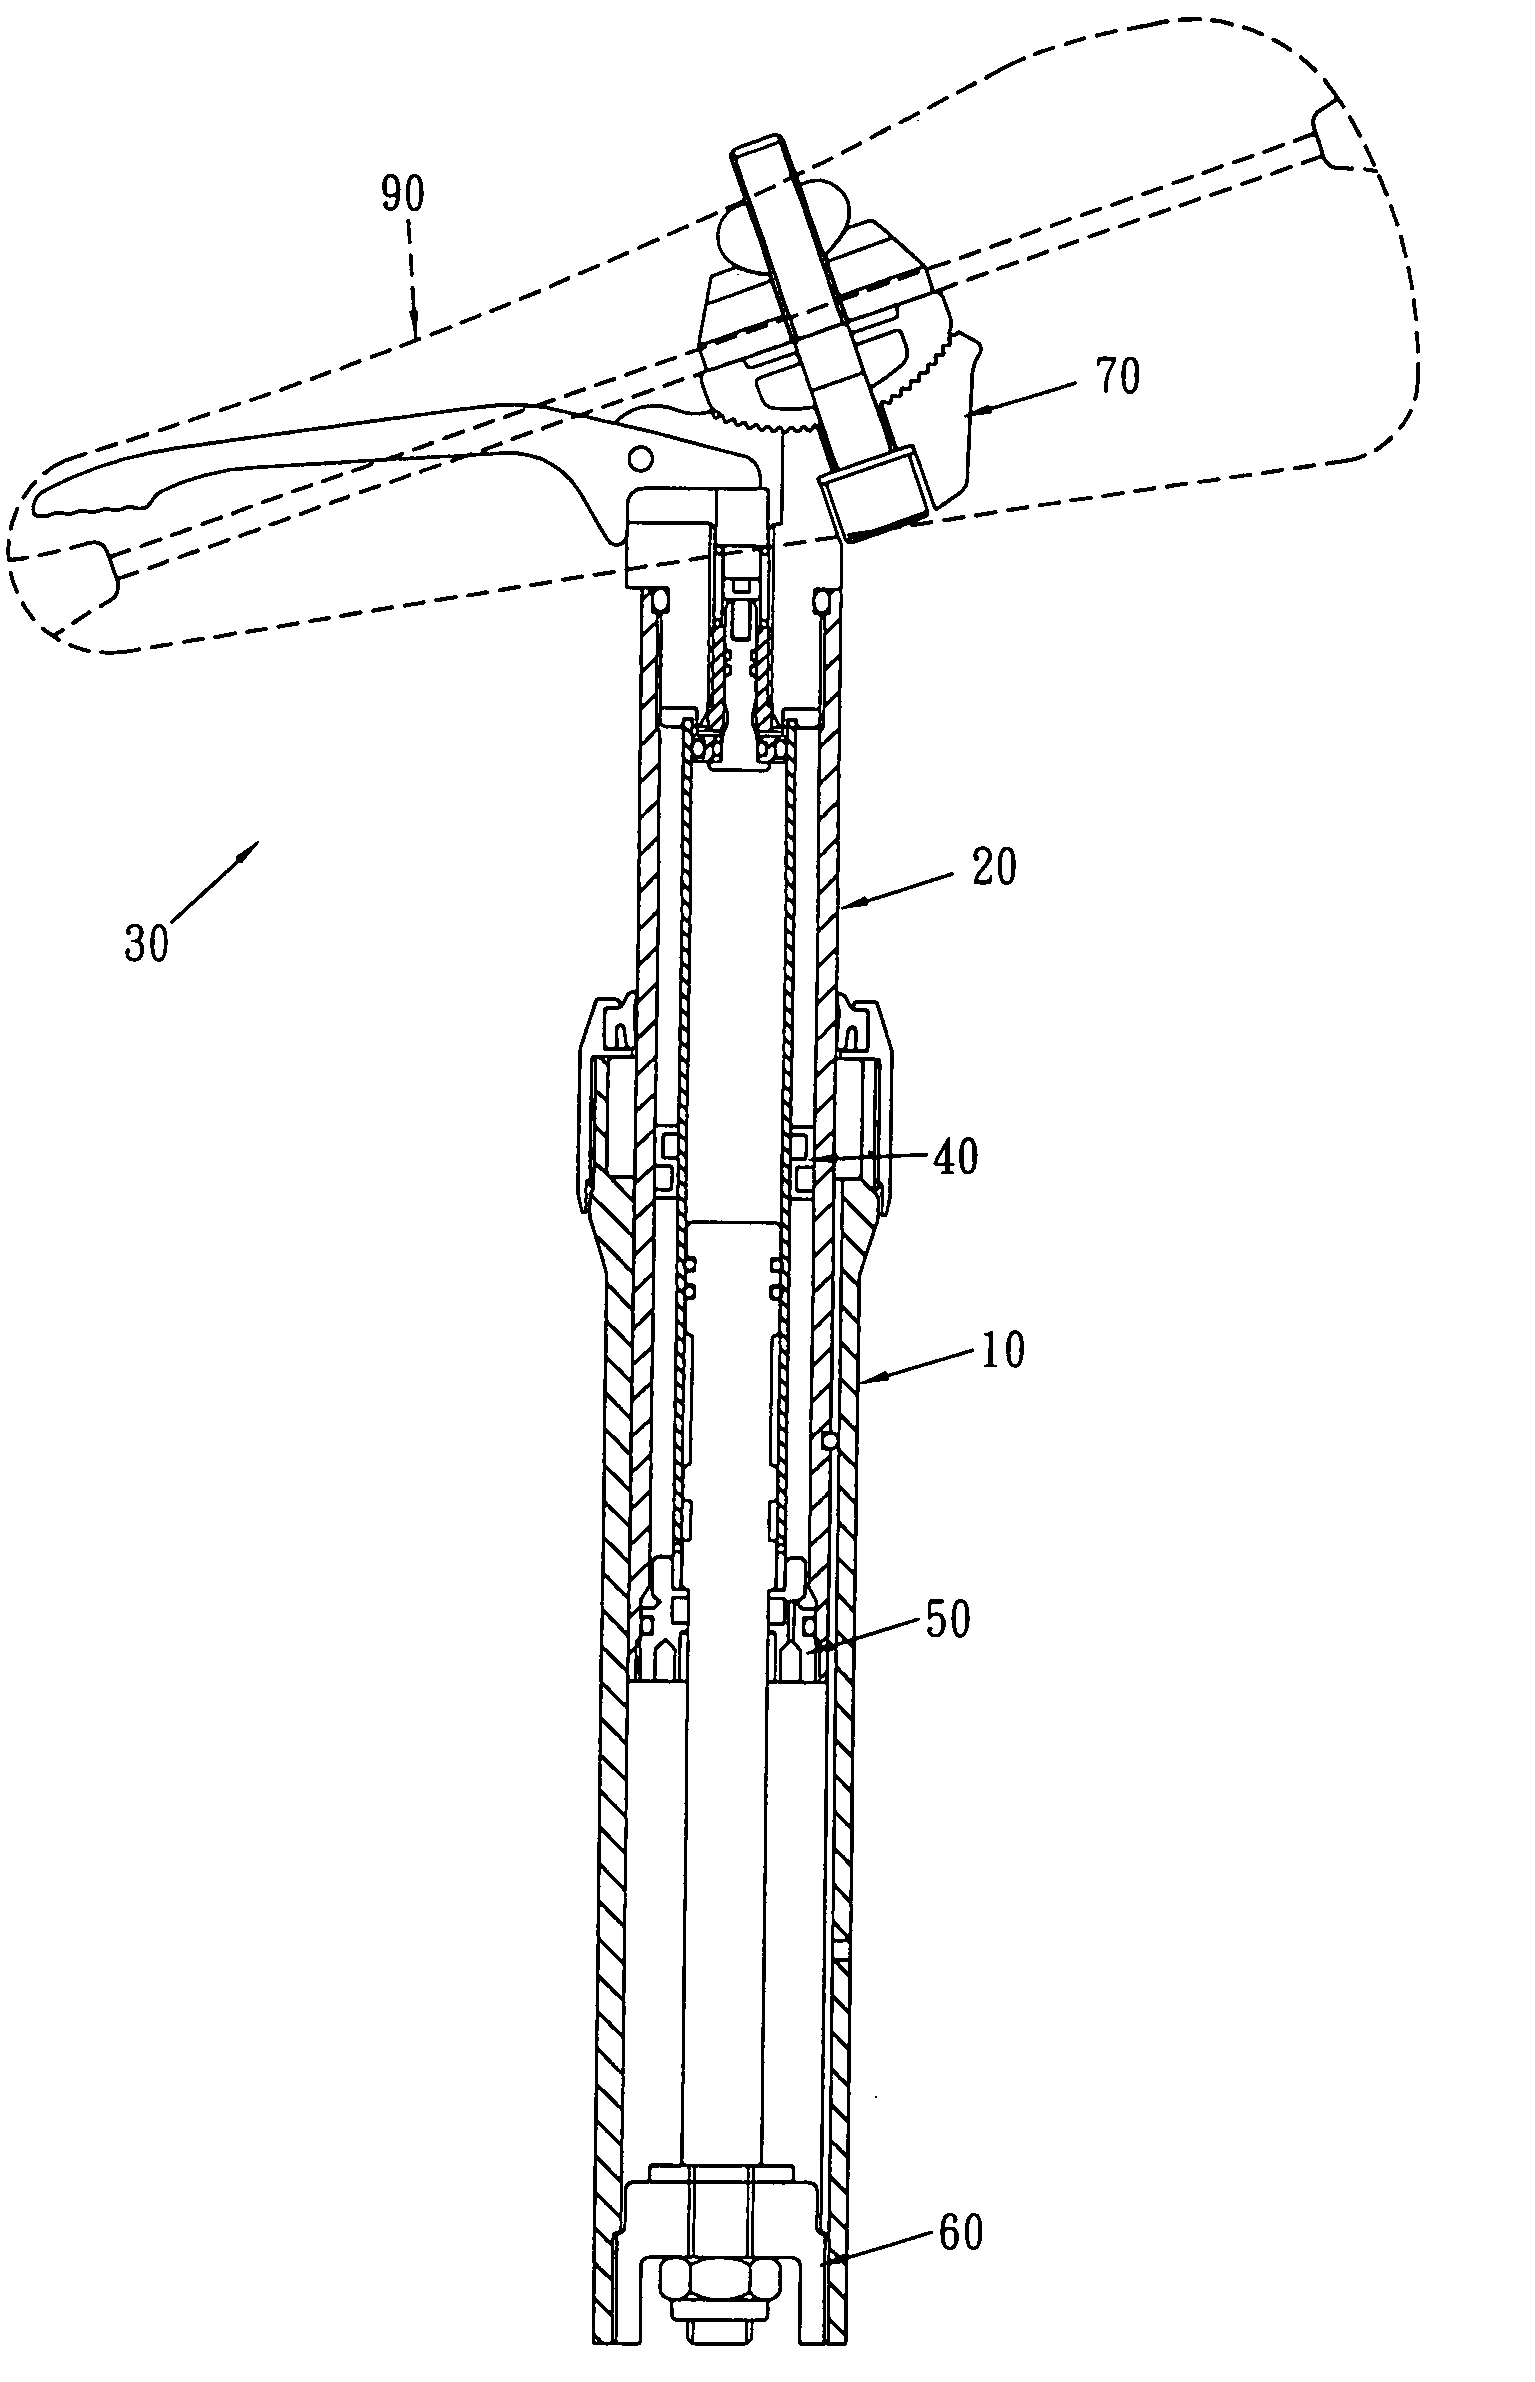 Adjustable bicycle seat assembly